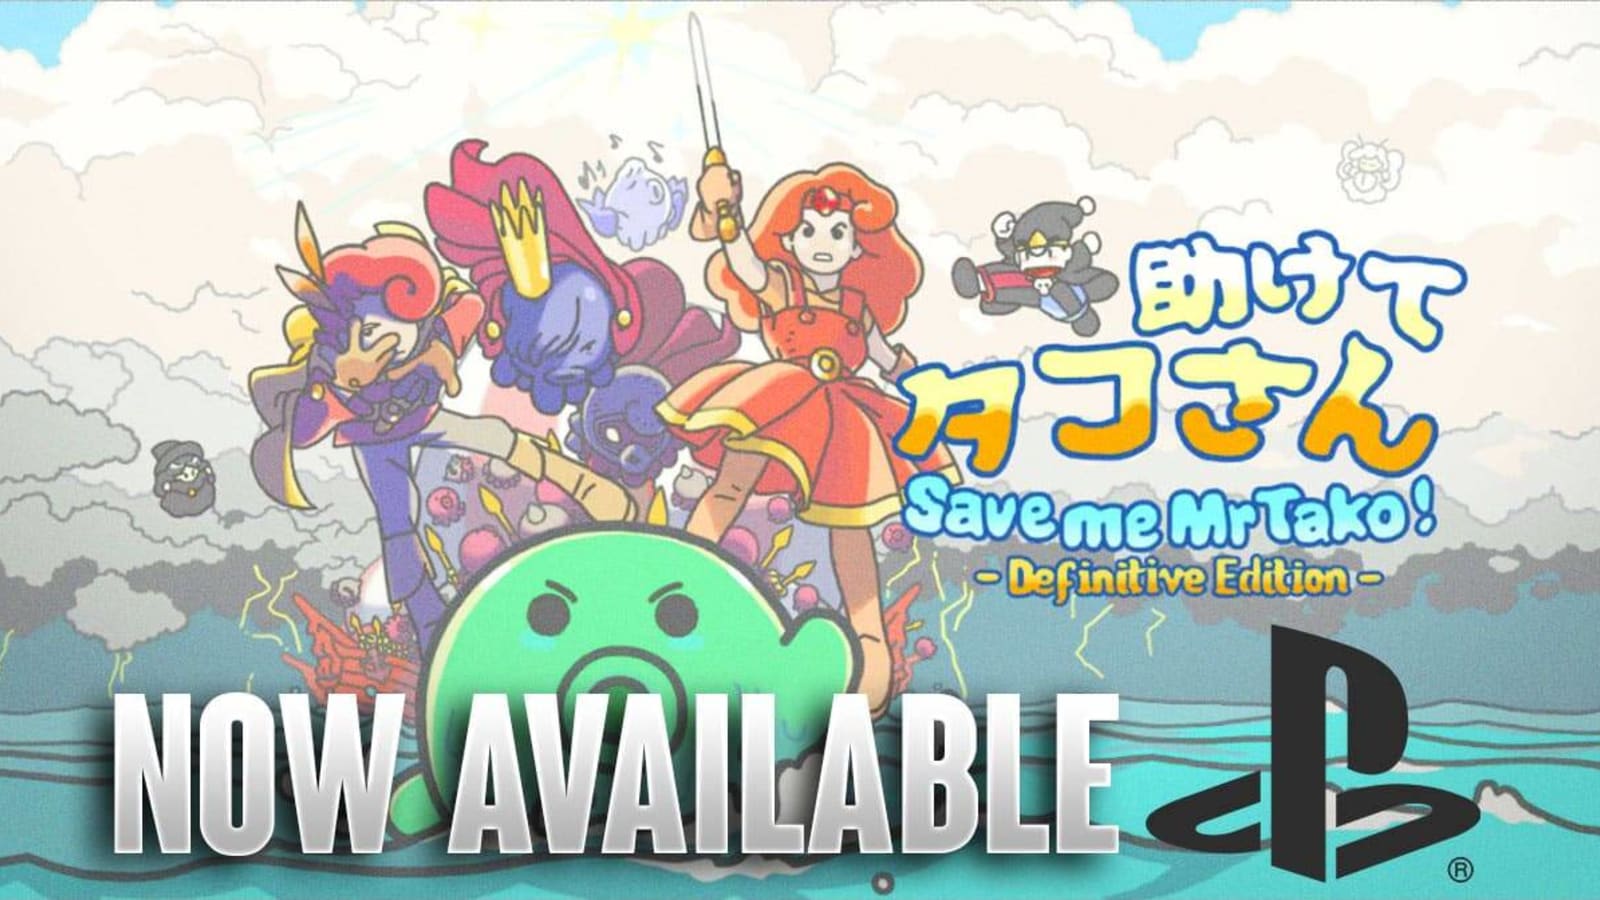 Save me Mr Tako: Definitive Edition Available on PlayStation